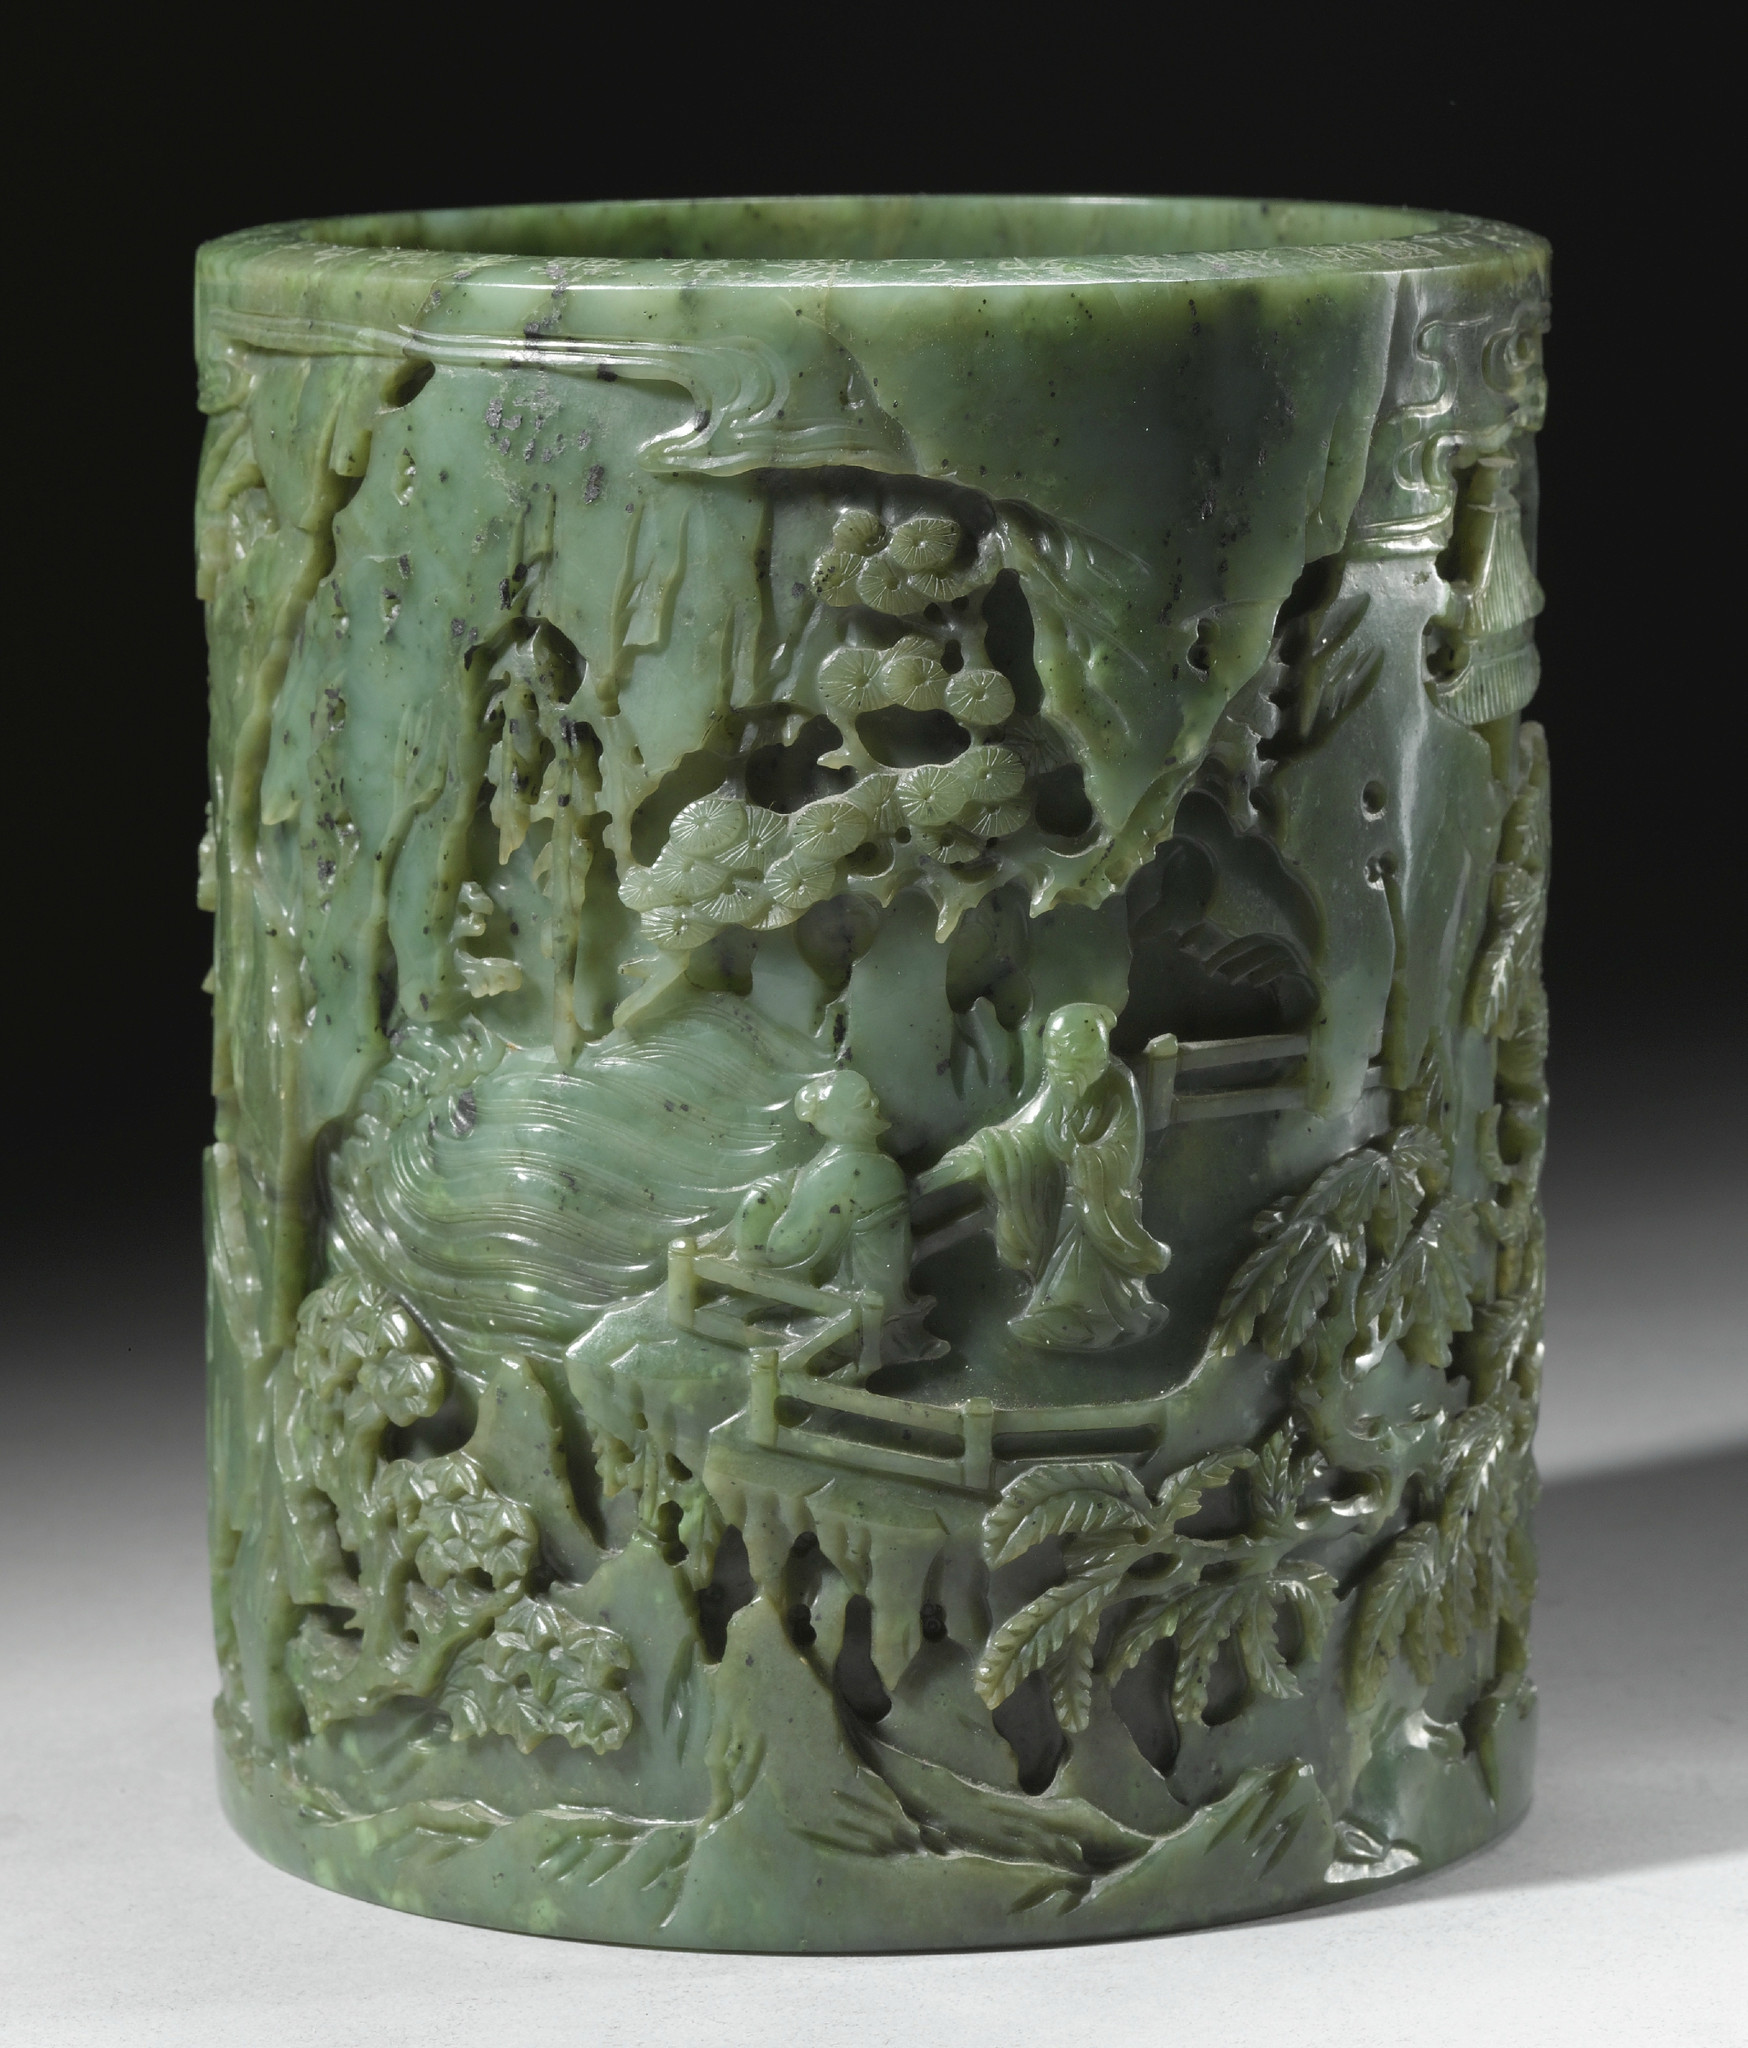 13 Cute Qianlong Emperor Vase 2024 free download qianlong emperor vase of an imperially inscribed finely carvd spinach jade brushpot qing throughout qing dynasty qianlong period dated to the yimao year corresponding to 1795 estimate 200000